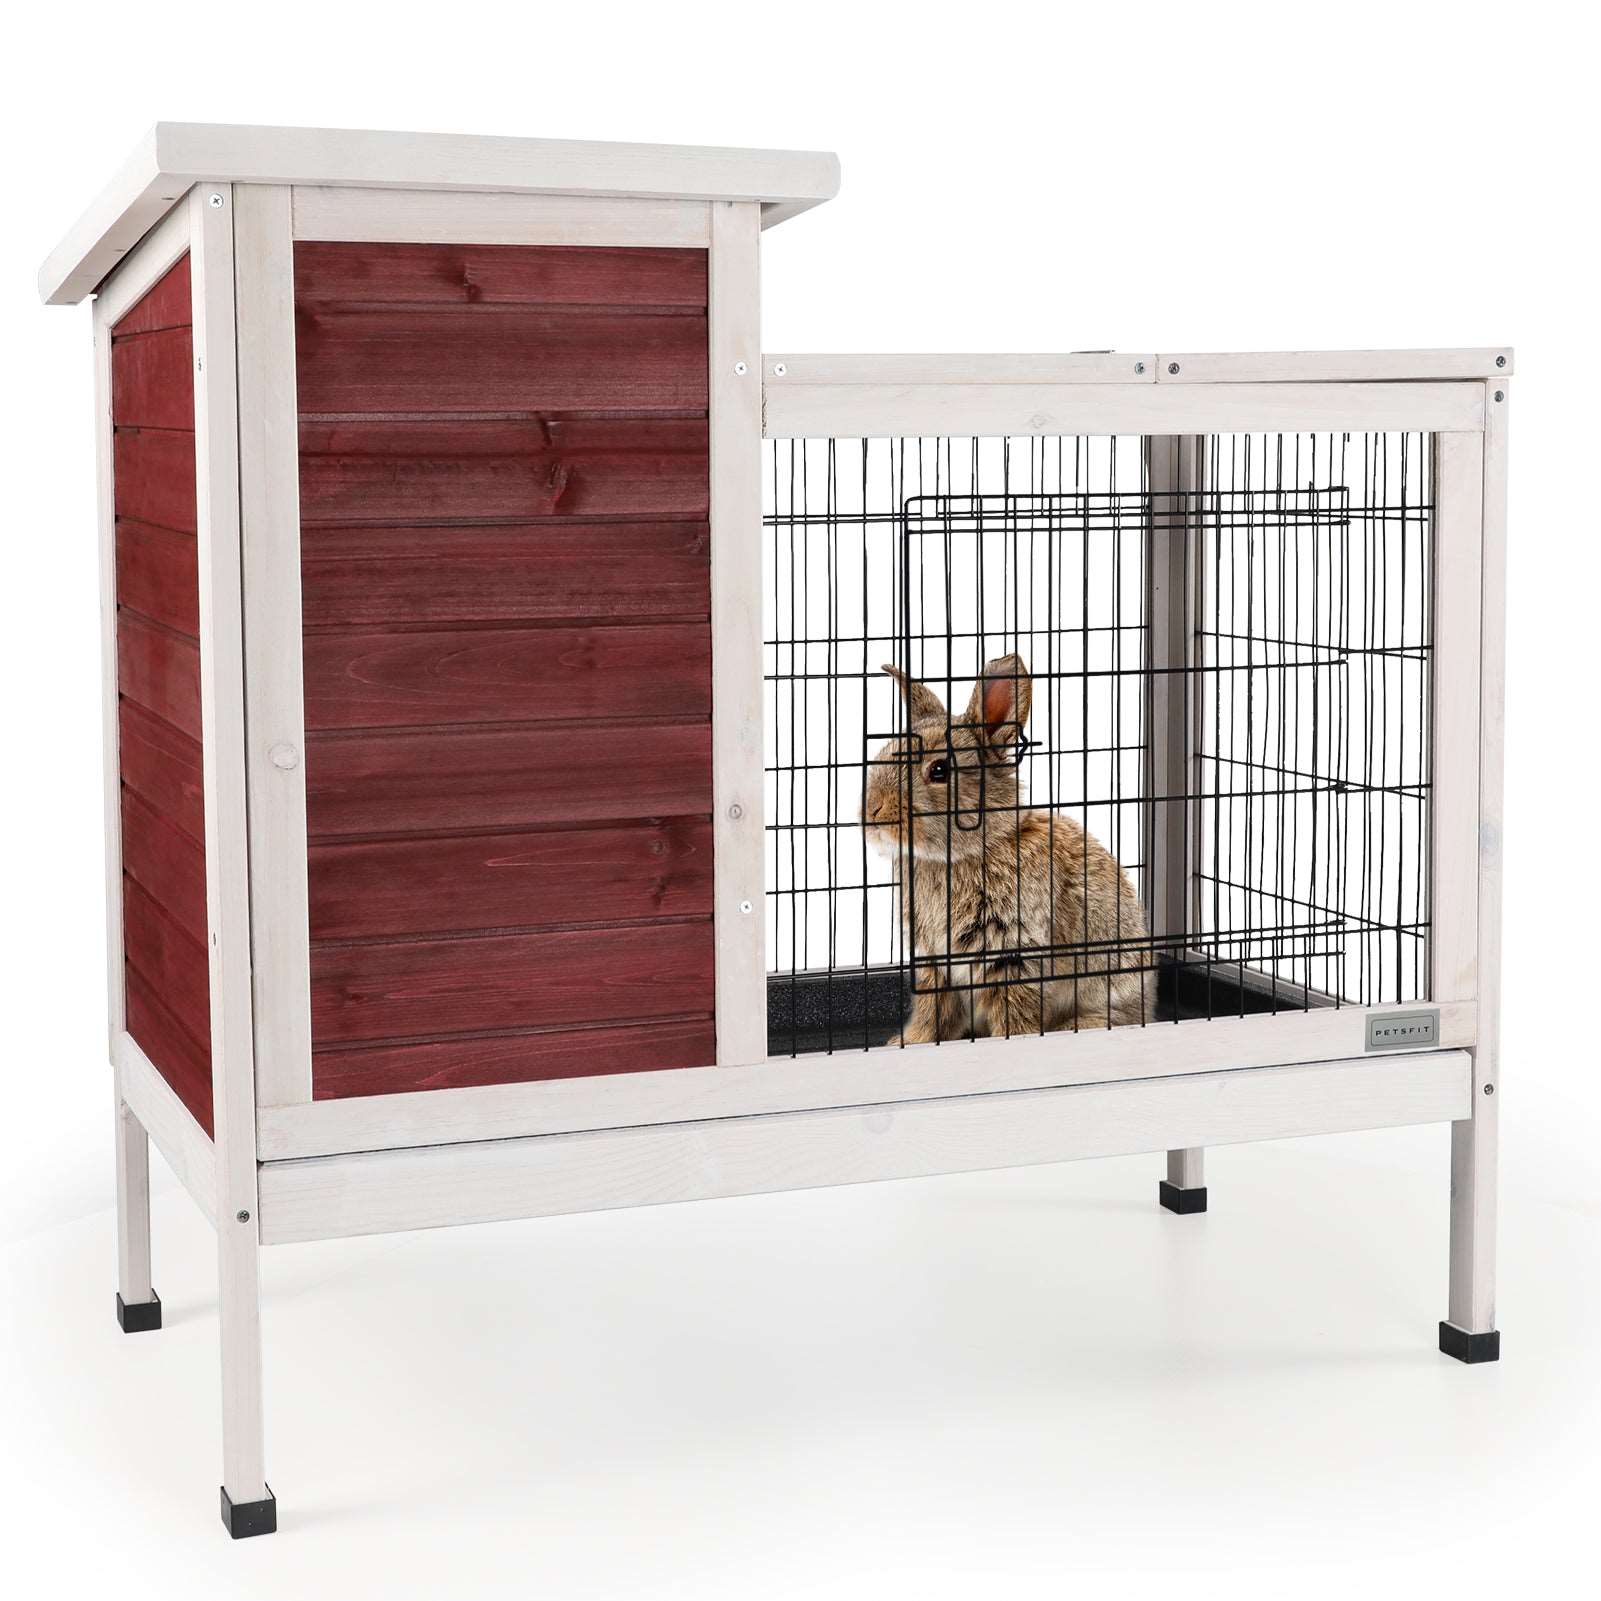 Petsfit-Guinea-Pig-Cage-Rabbit-Hutch-with-Pull-Out-Tray-05